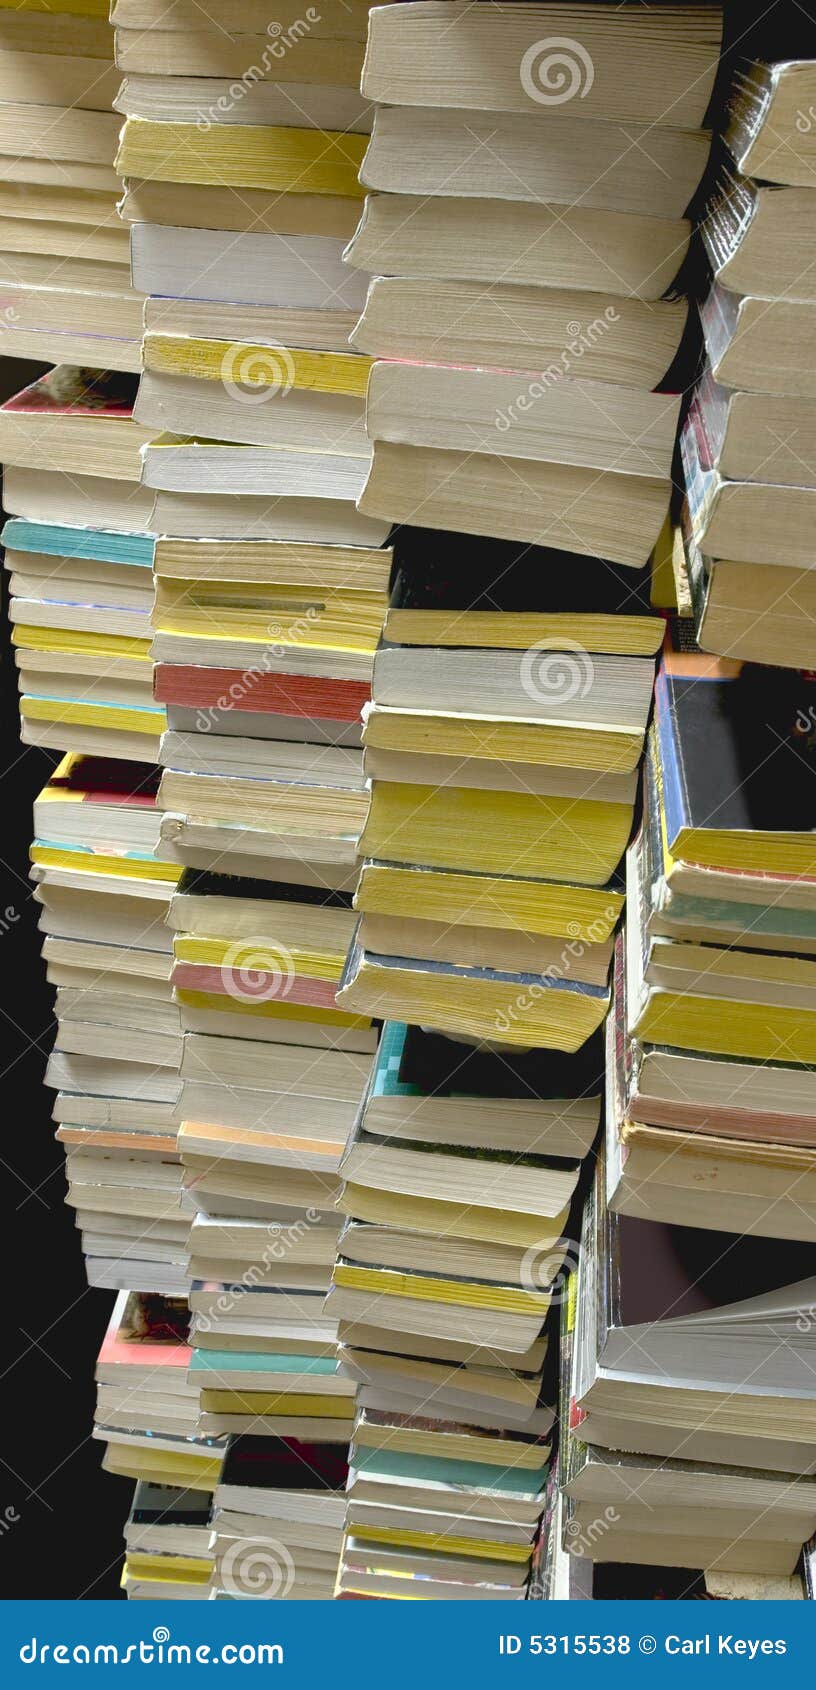 stacks of used paperback books